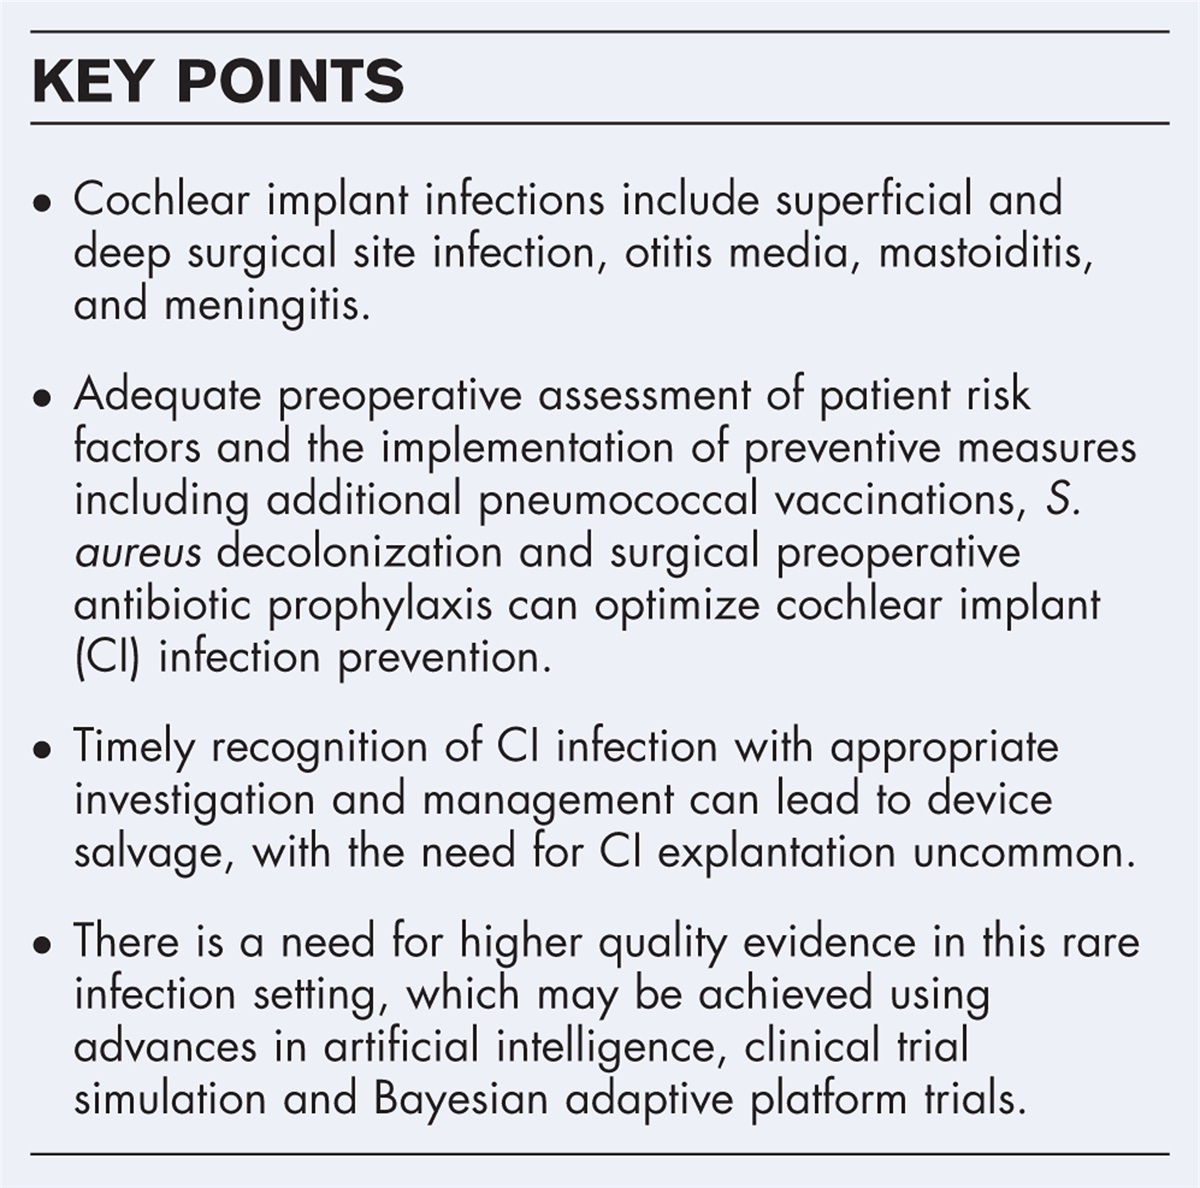 An overview of risk factors, management and prevention of cochlear implant infections